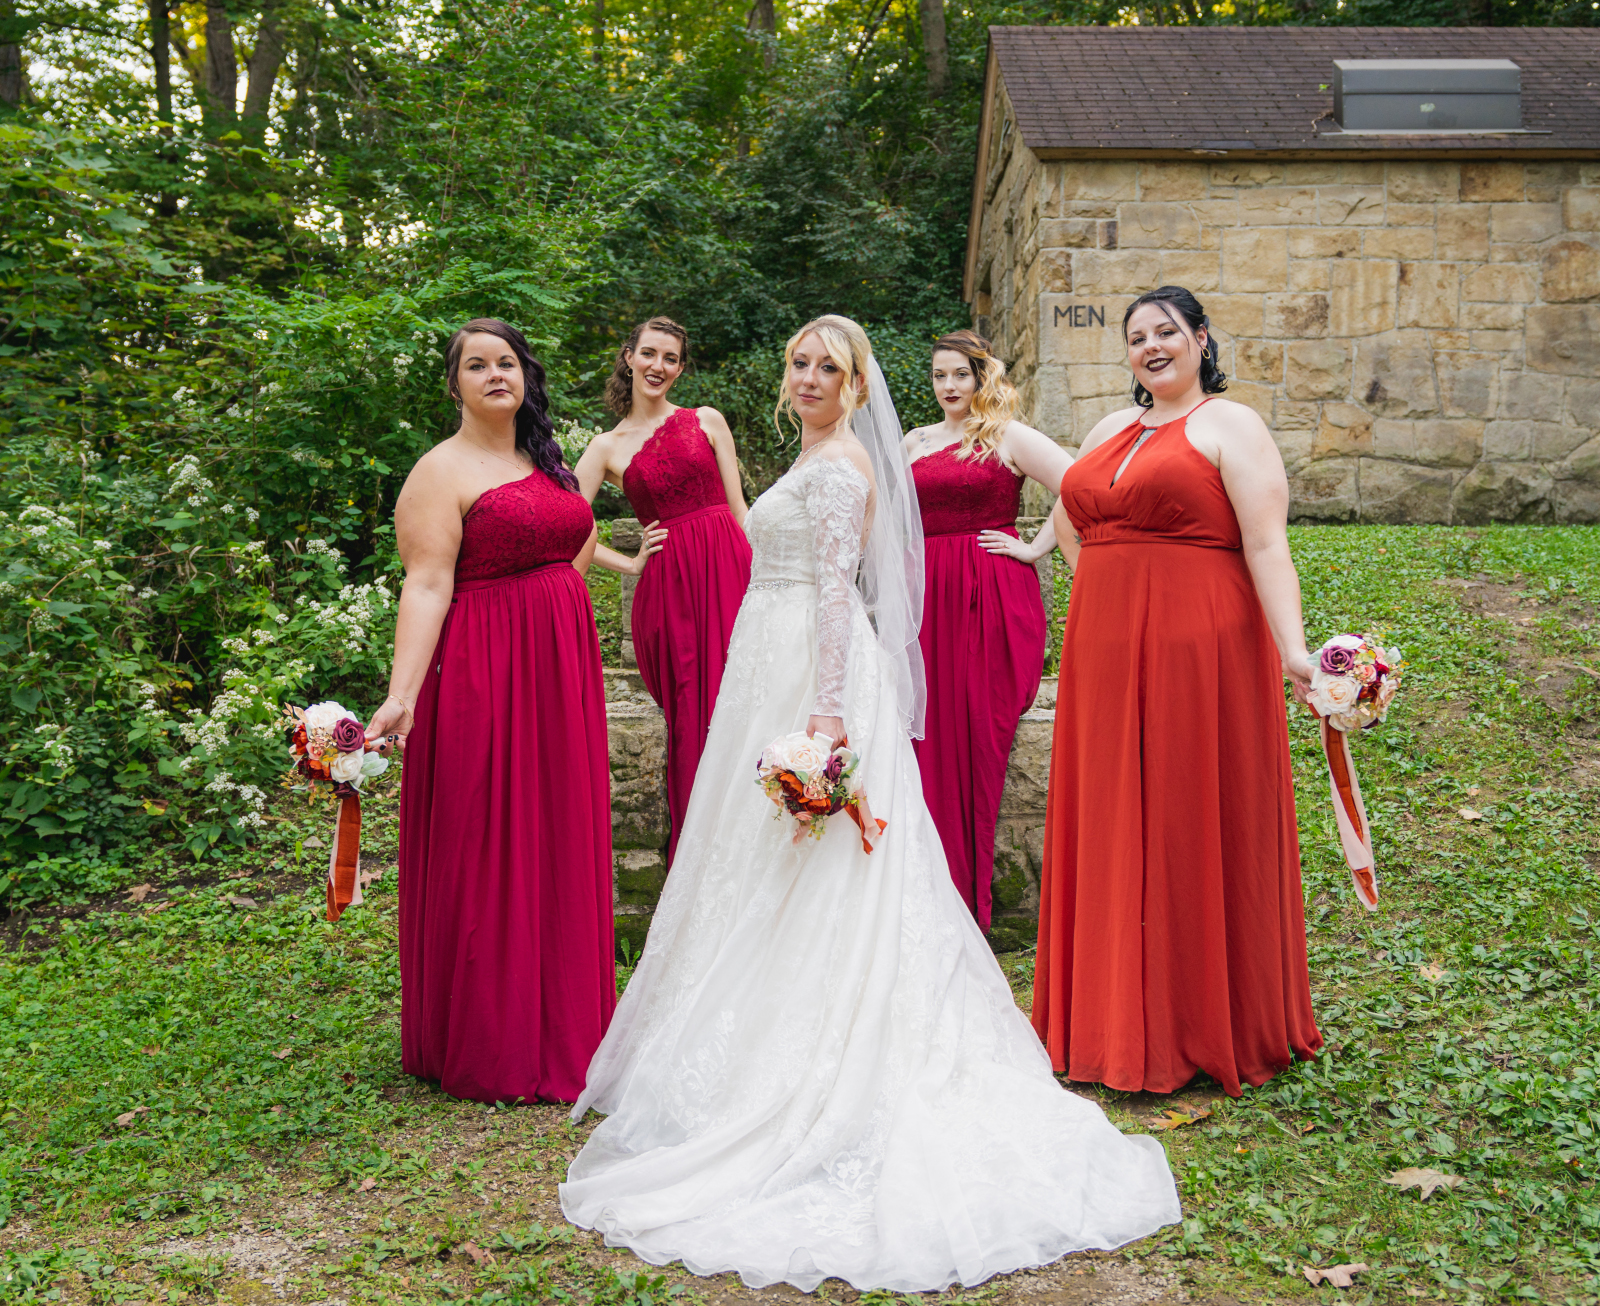 Bride with bridesmaids, bridal party portrait, green, nature, trees, fall wedding, cute outdoor wedding ceremony at Grand Pacific Wedding Gardens